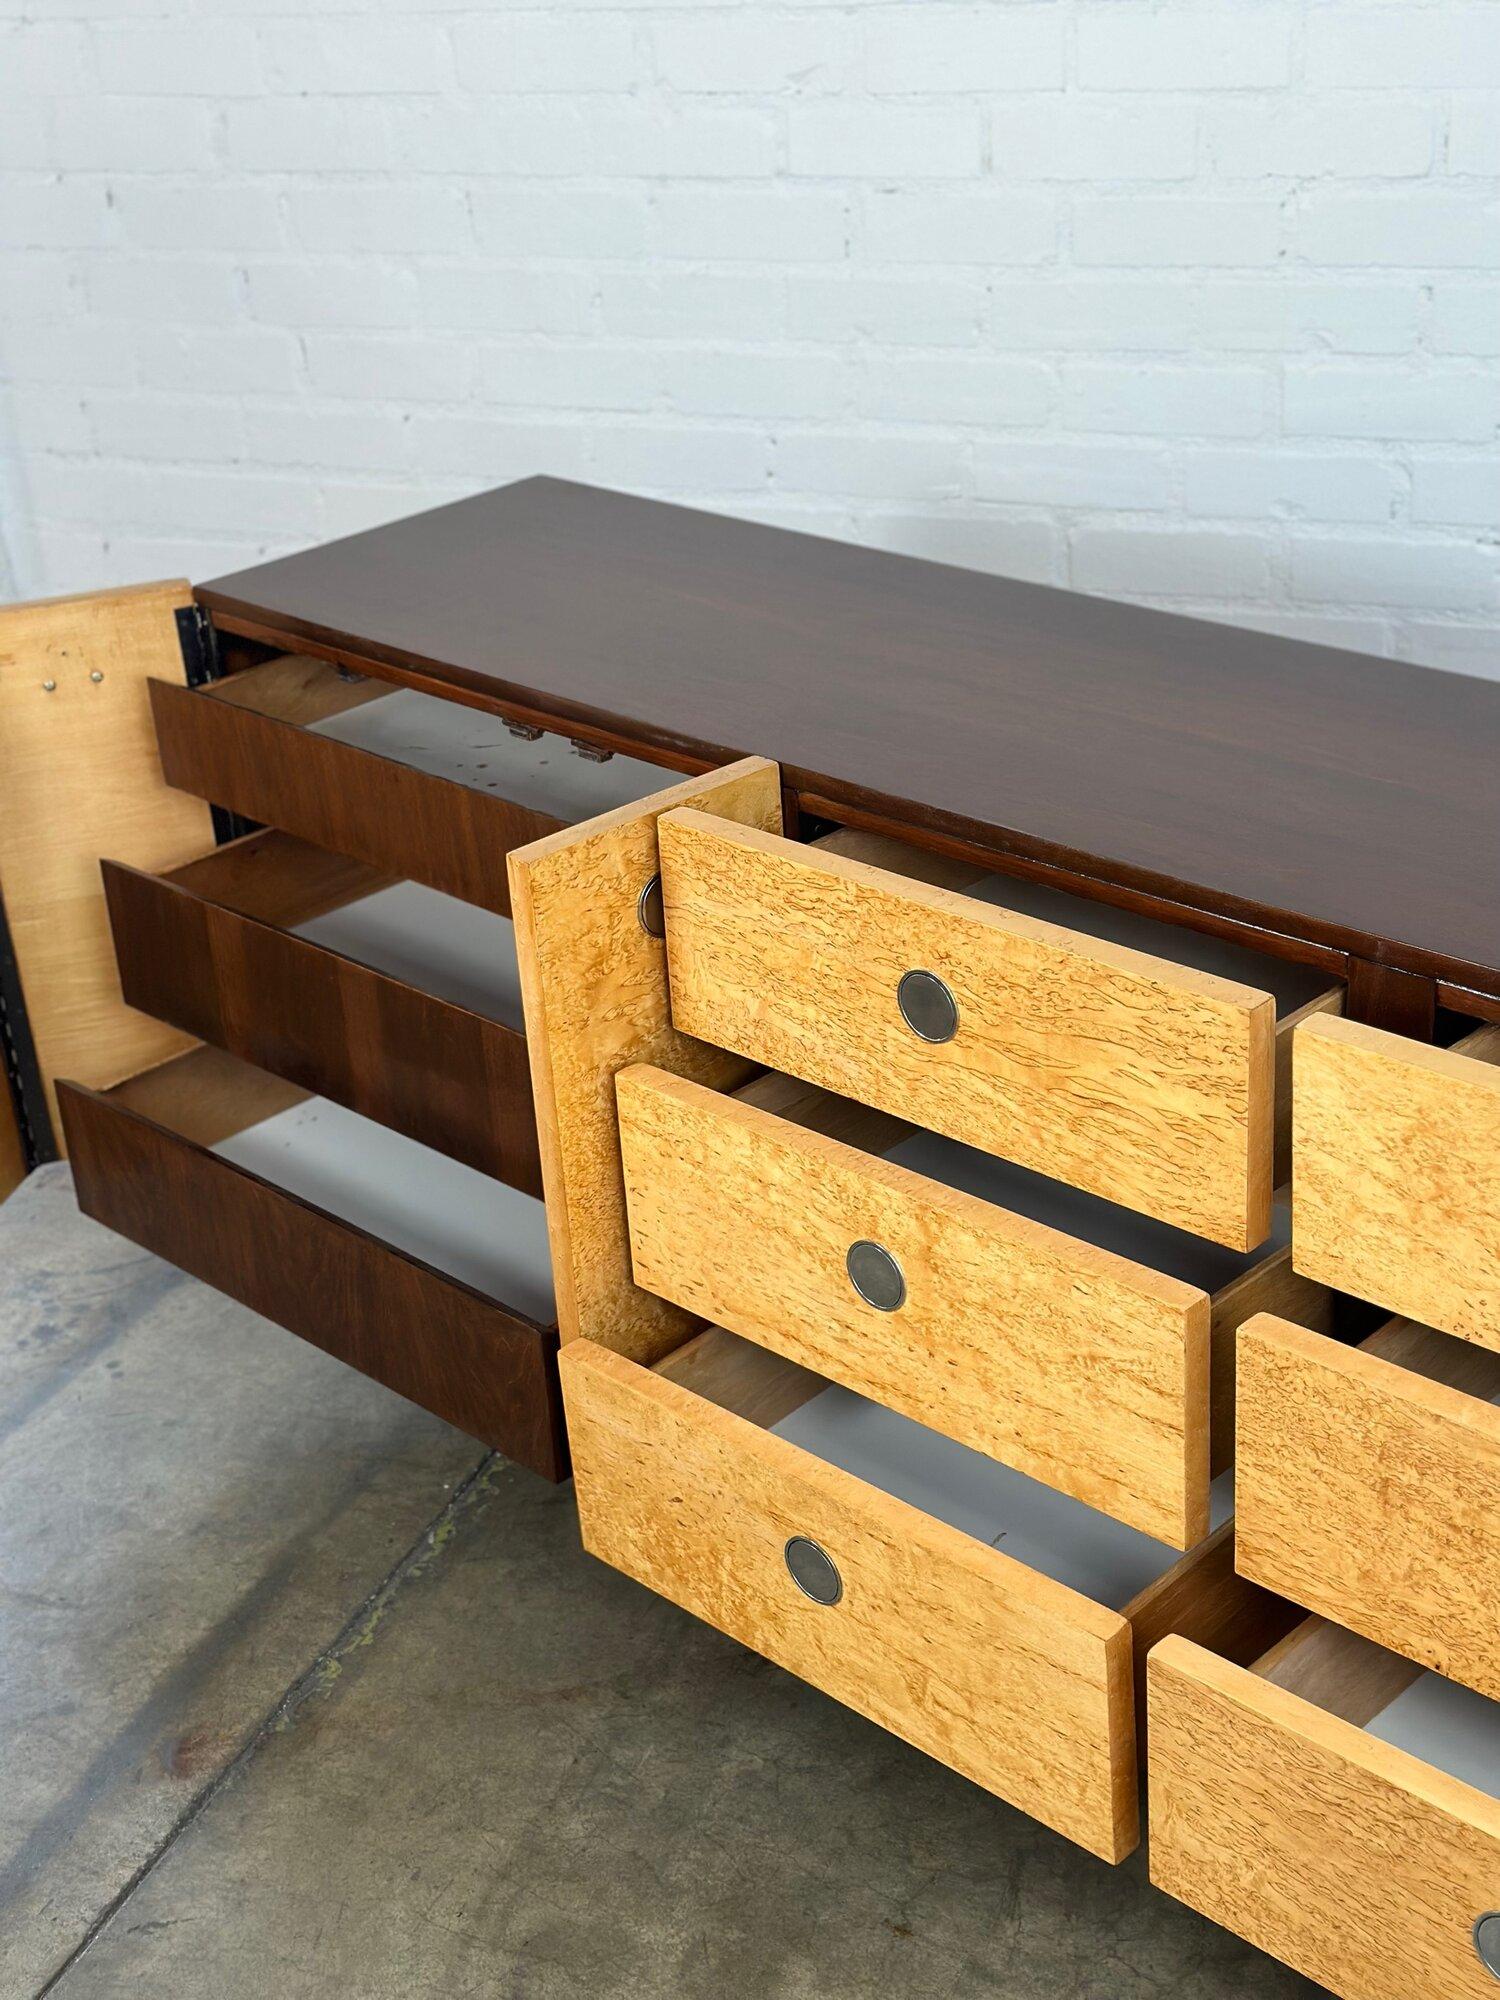 Measures : W76 D19 H31

Midcentury burl wood dresser with chrome hidden pulls. Dresser has a walnut finish frame and opens to reveal more storage. Item is structurally sound and sturdy. Item has no major areas of wear, matching nightstands are